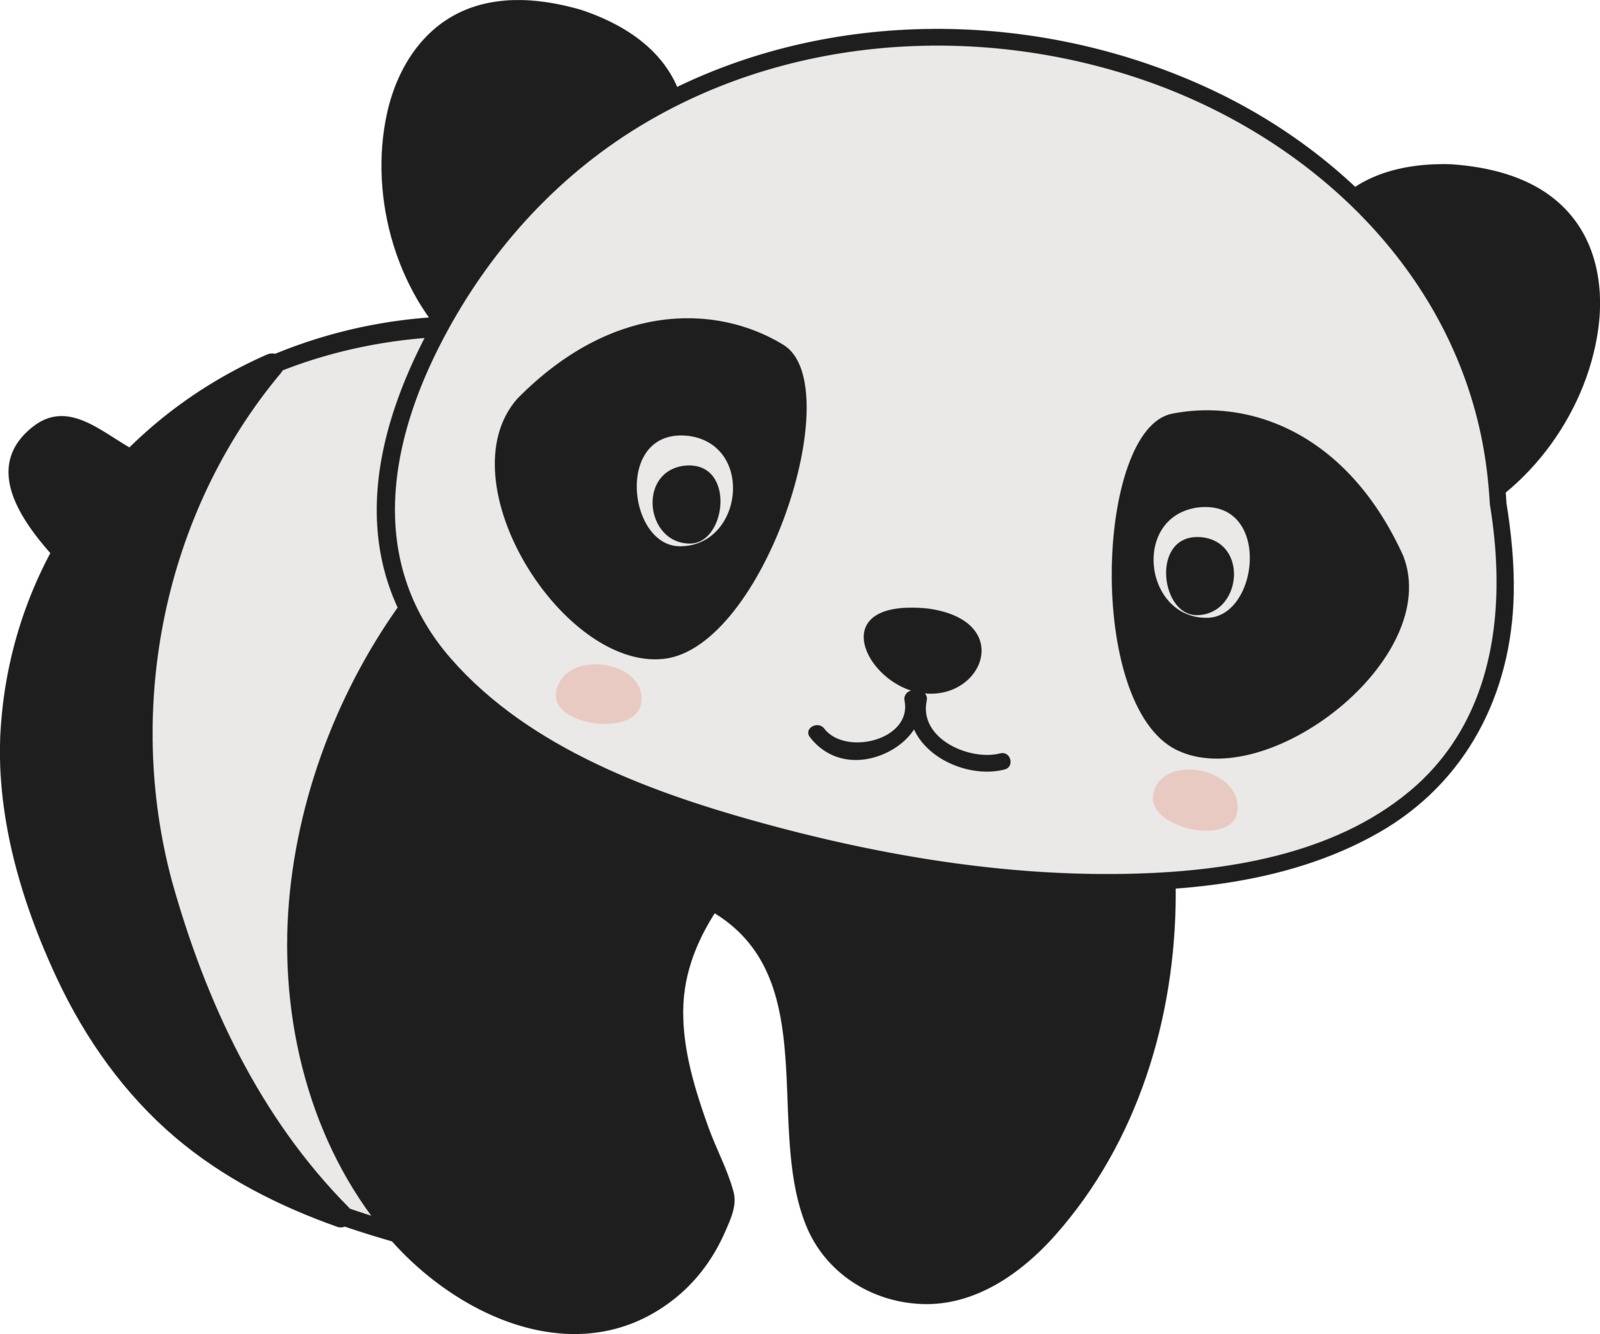 Cute baby panda, illustration, vector on white background. by Morphart